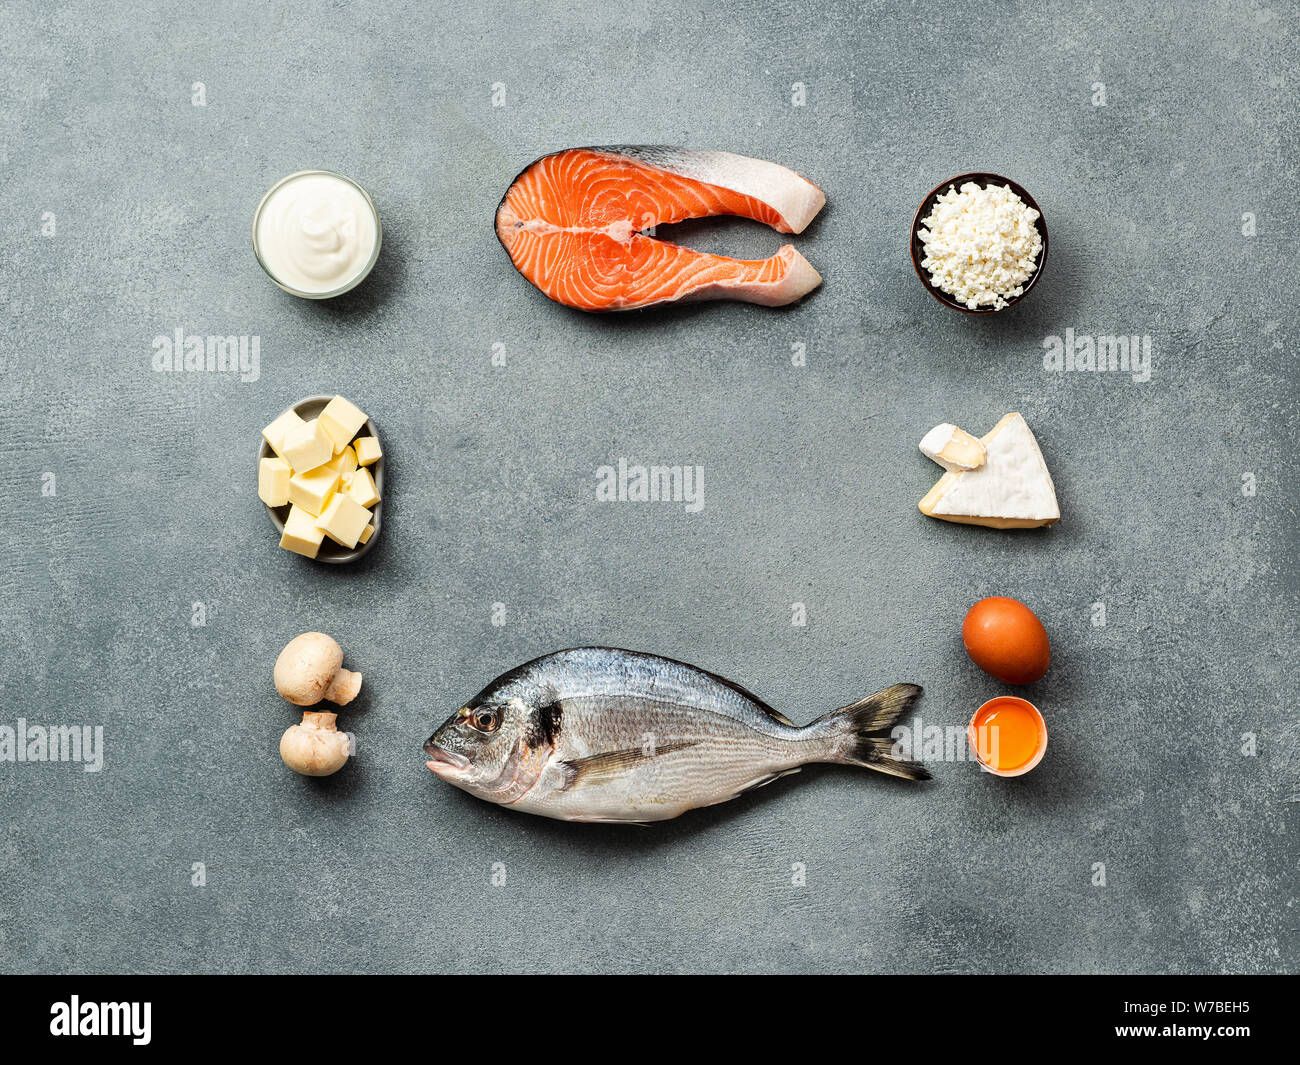 Vaitamin D sources concept with copy space in center. Fish, salmon, dairy products, eggs, mushrooms on gray stone background. Top view or flat lay. Stock Photo